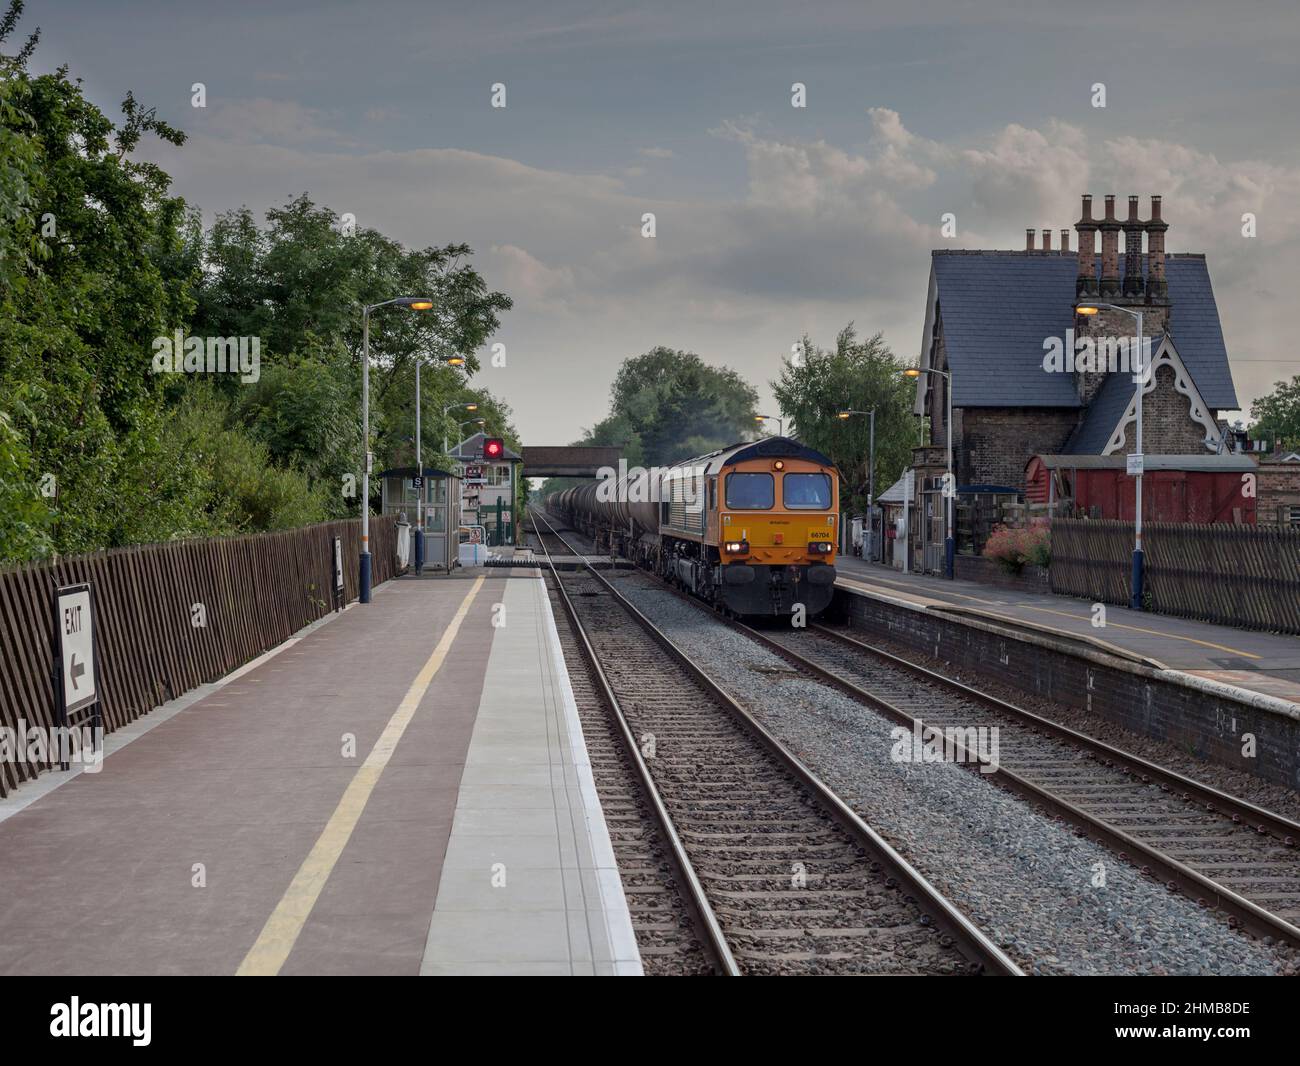 GB Railfreight  Class 66   freight locomotive at Lowdham railway station (East of Nottingham)  with a train of  tanks Stock Photo